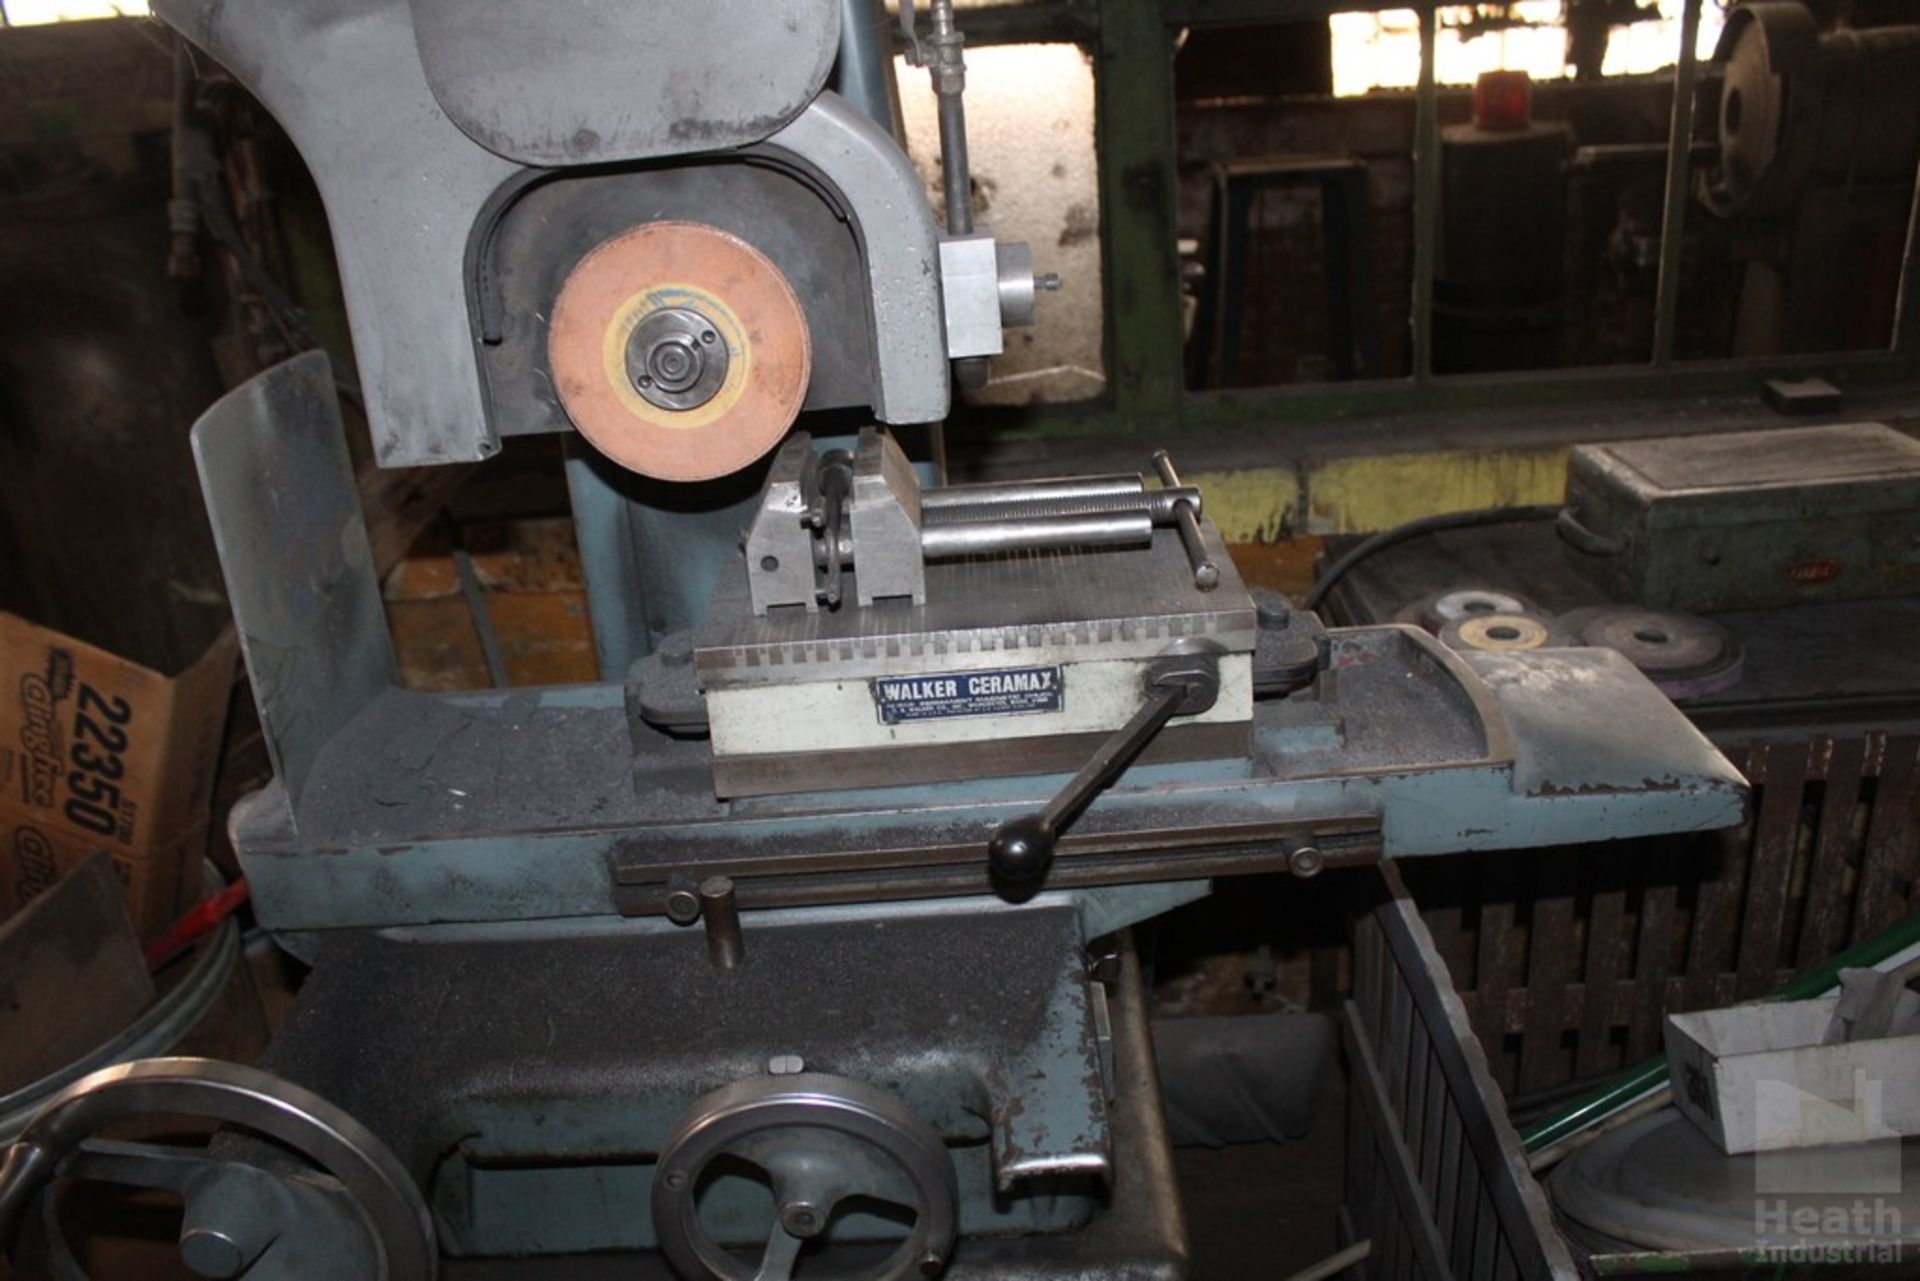 HARIG 6” x 12” MODEL SUPER 612 SURFACE GRINDER, S/N 5171, WITH PERMANENT MAGNETIC CHUCK - Image 2 of 5